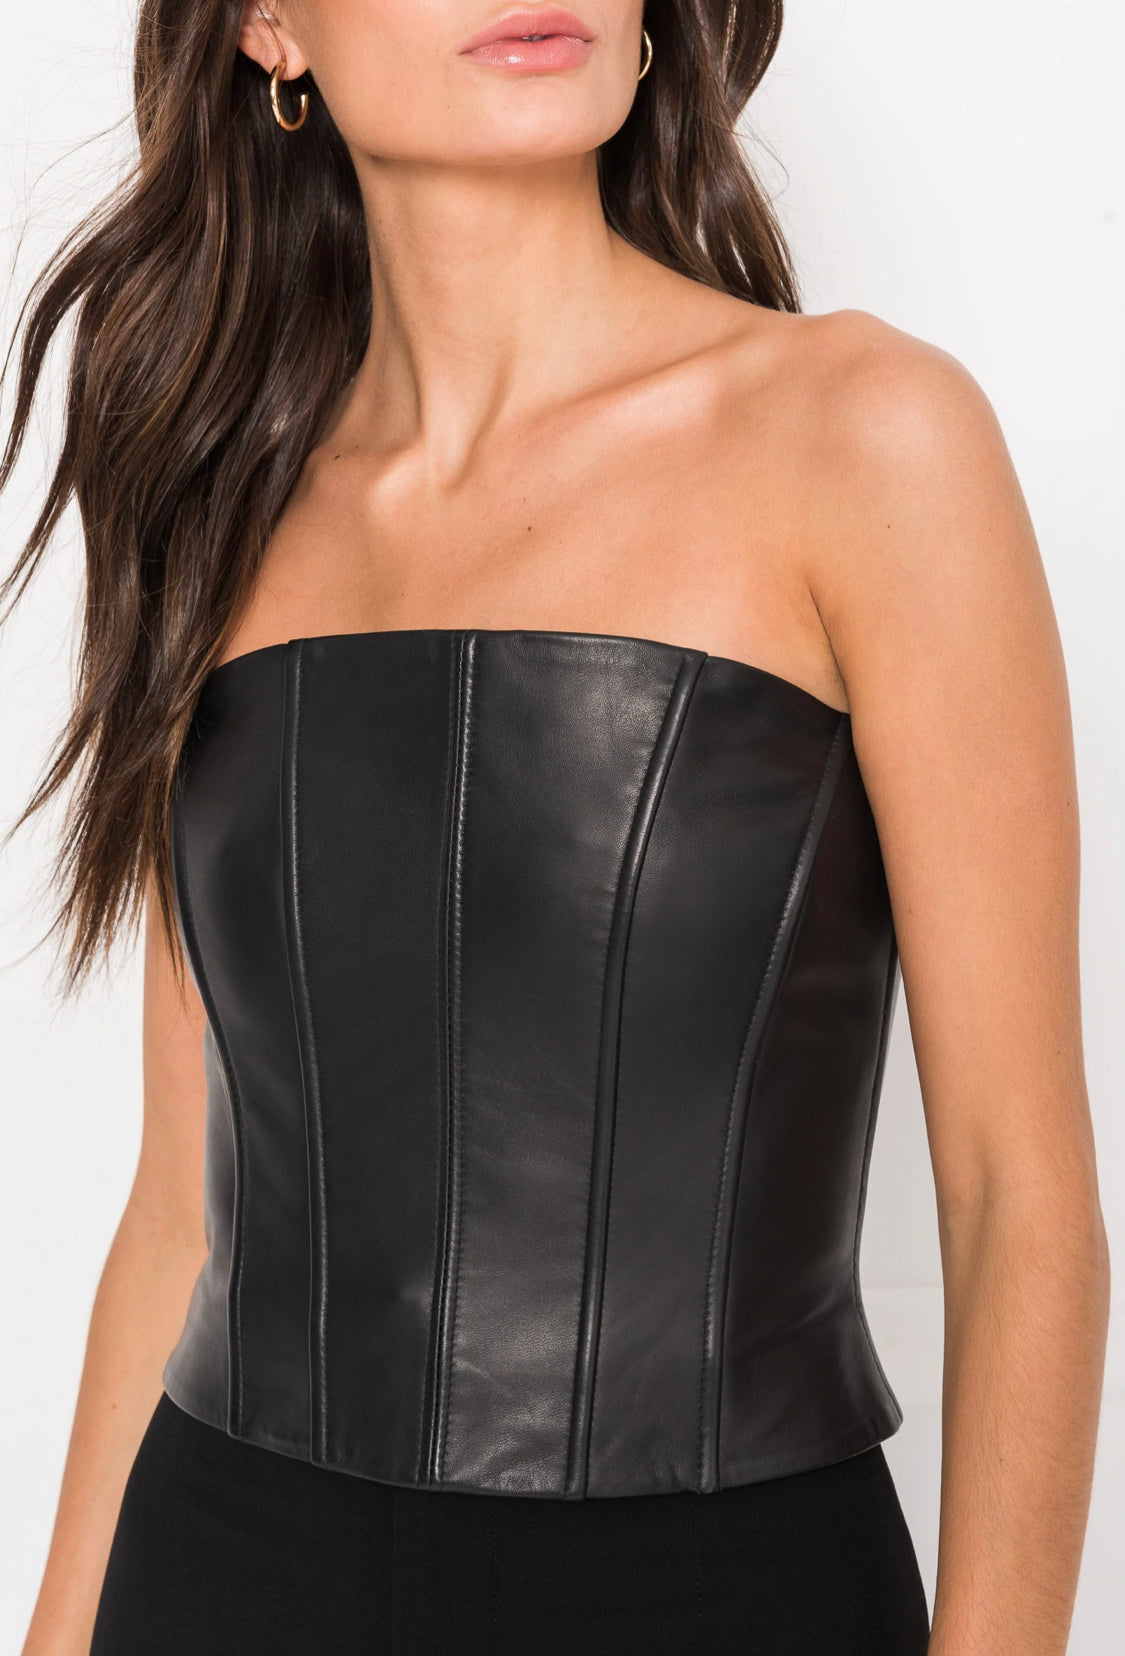 LaMarque Davina Leather Bustier - The LALA Look